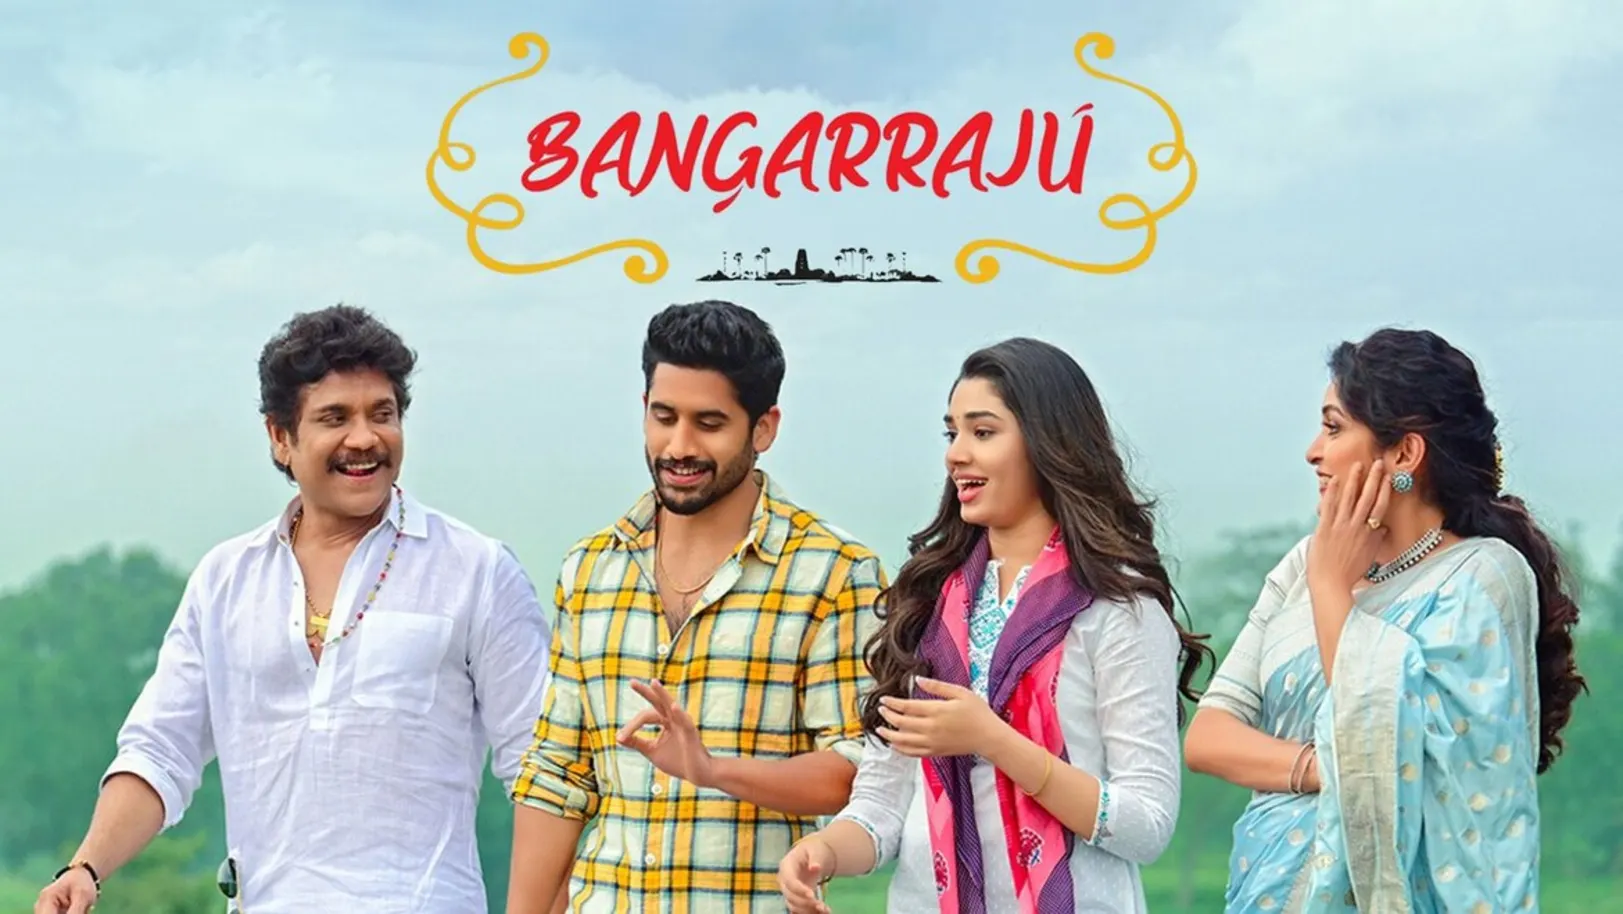 Bangarraju Streaming Now On &Pictures HD